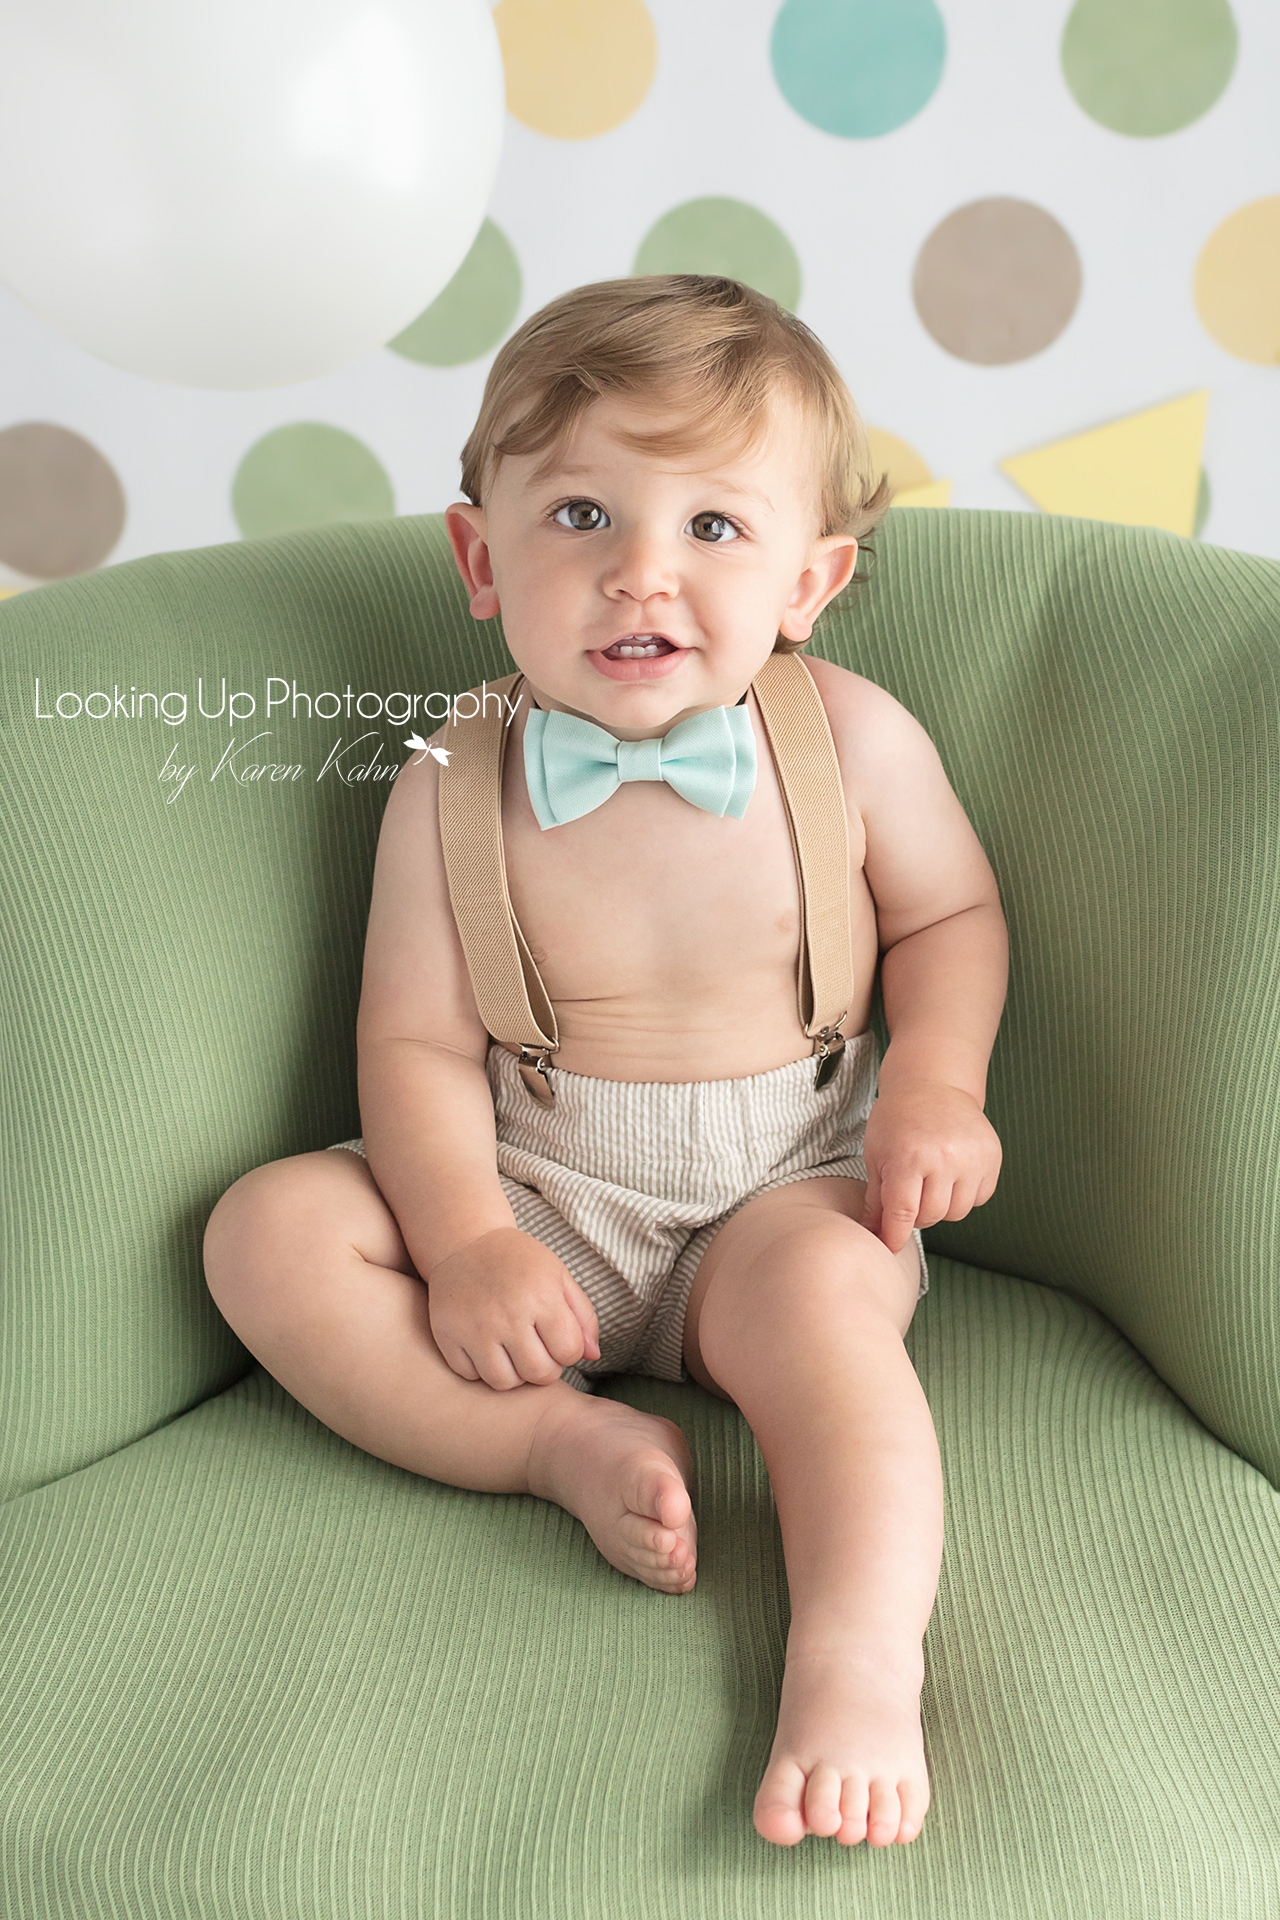 One year old baby boy wearing bow tie and suspenders smiling in snazzy green chair and polka dots for 12 month milestone portrait cake smash session